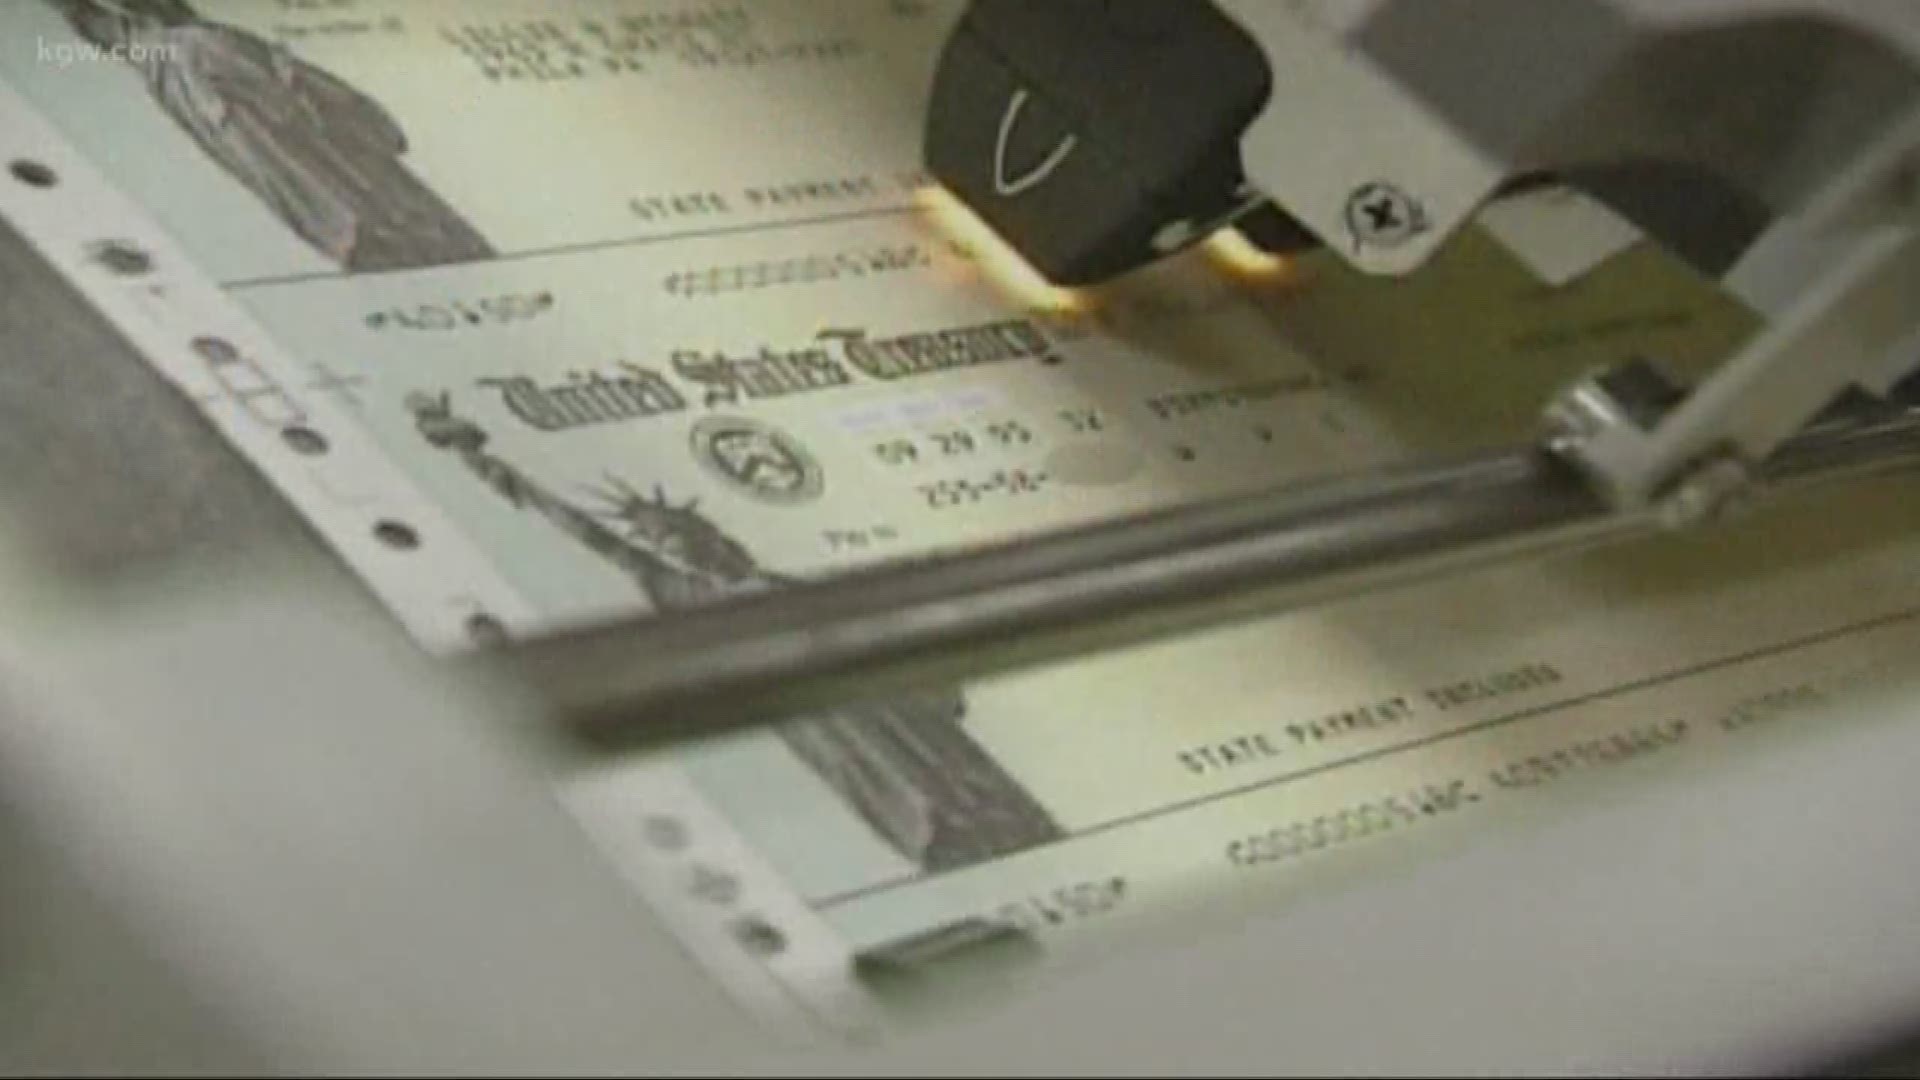 A Portland woman who passed away in February still got a stimulus check. Kyle Iboshi investigates.